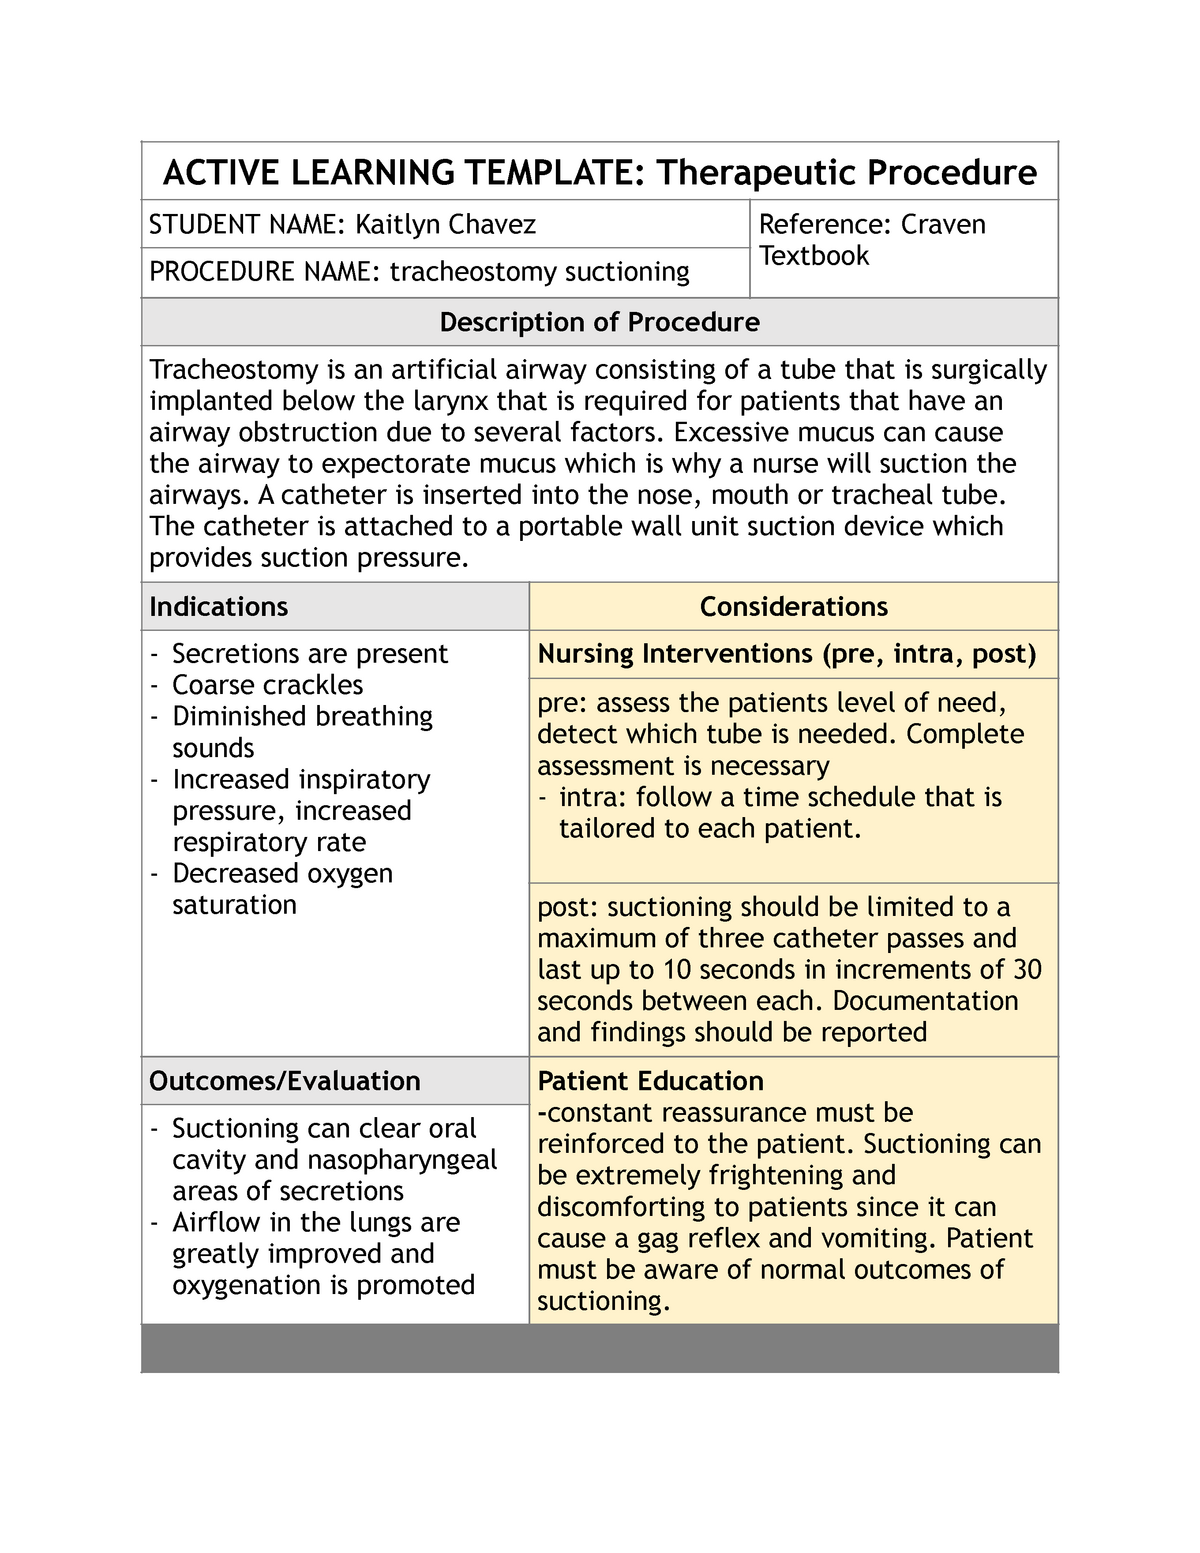 suctioning-ati-temp-lecture-notes-3-active-learning-template